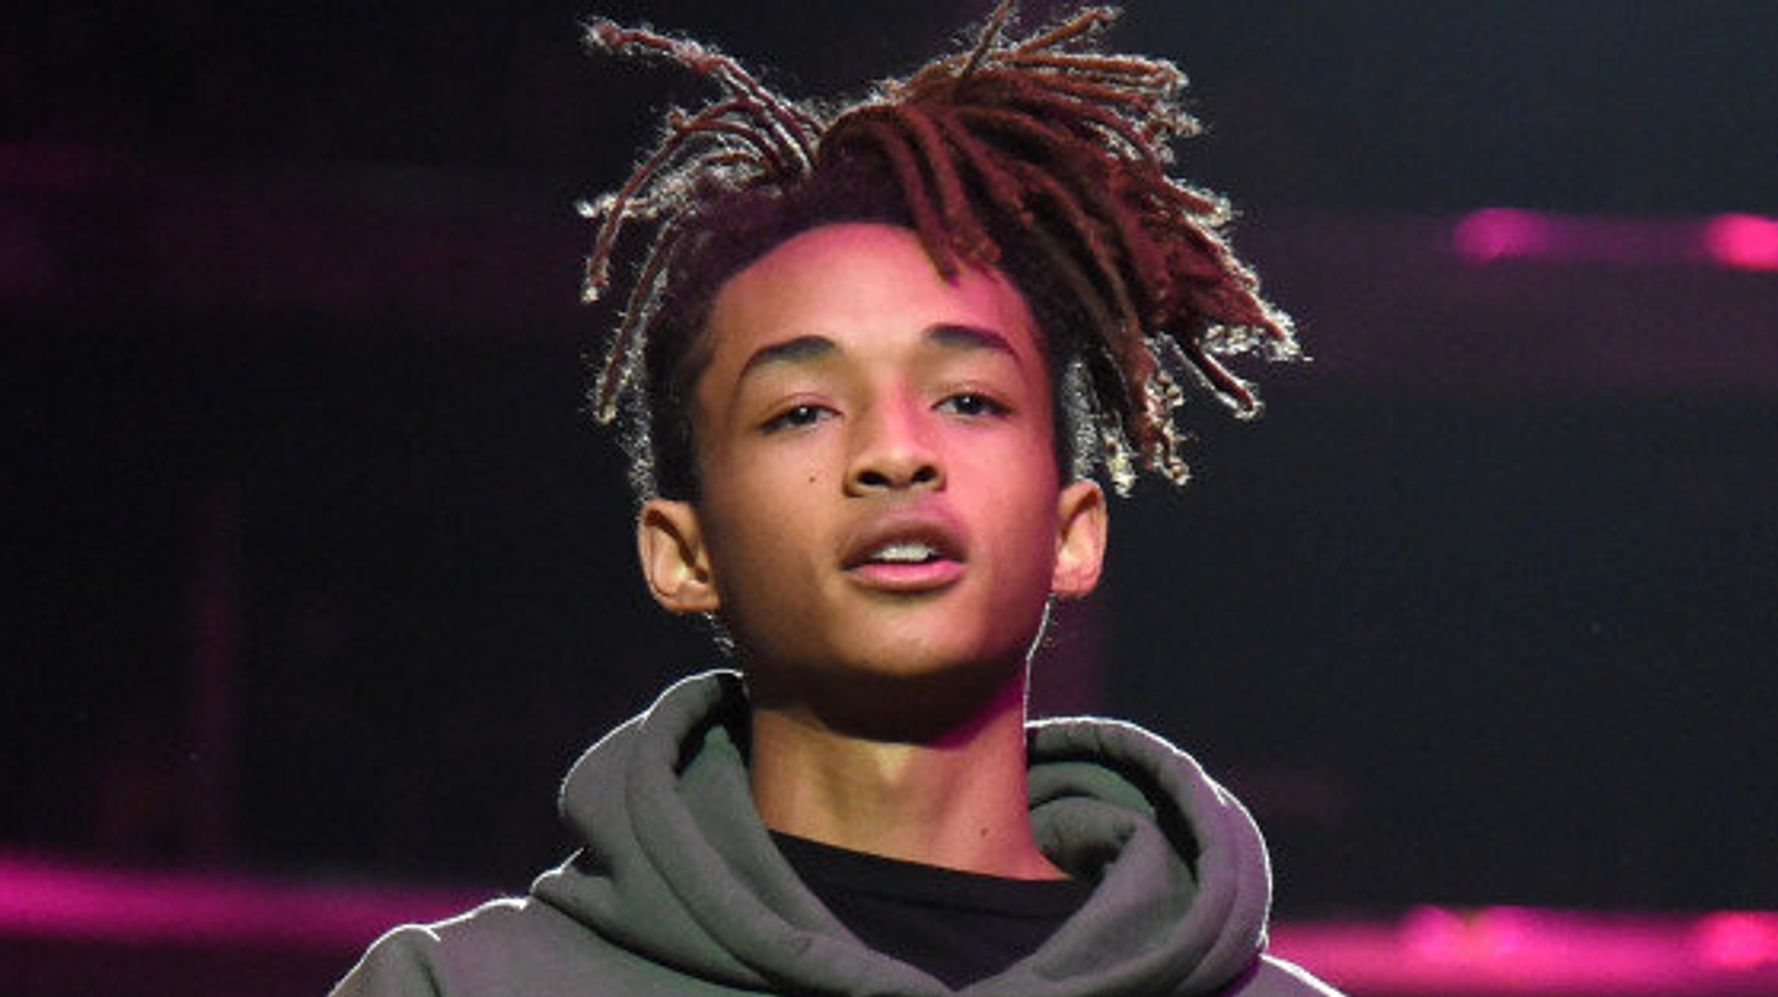 Jaden Smith Sports Skirt for Louis Vuitton's Womenswear Campaign - ABC News